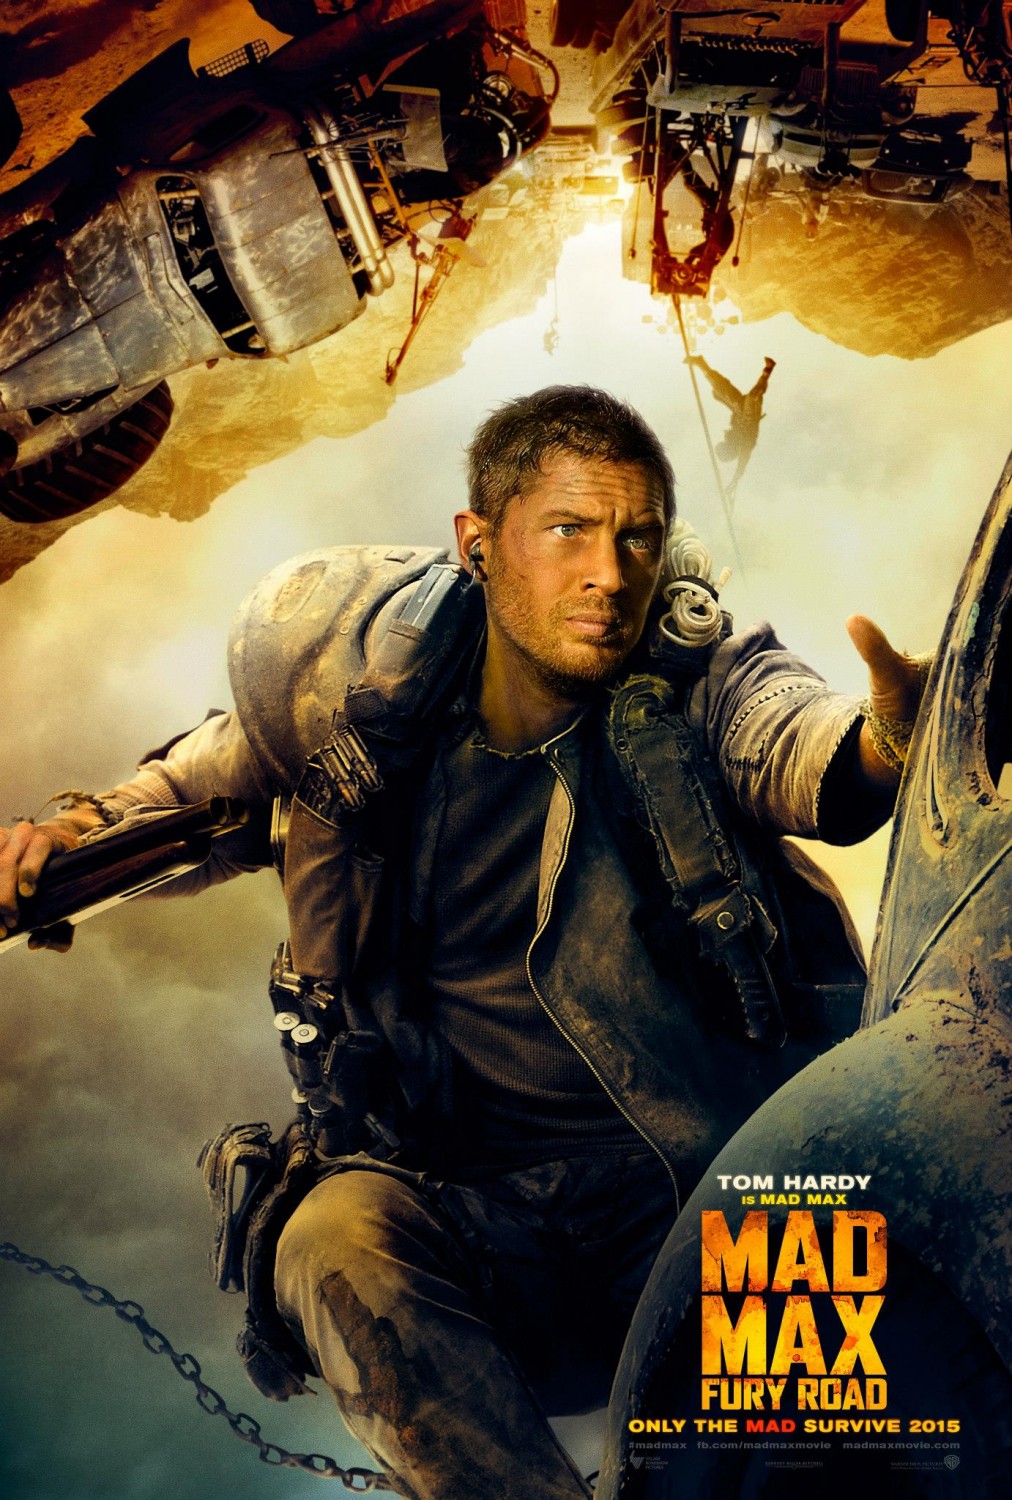 Tom Hardy Apologized To George Miller For 'Mad Max'